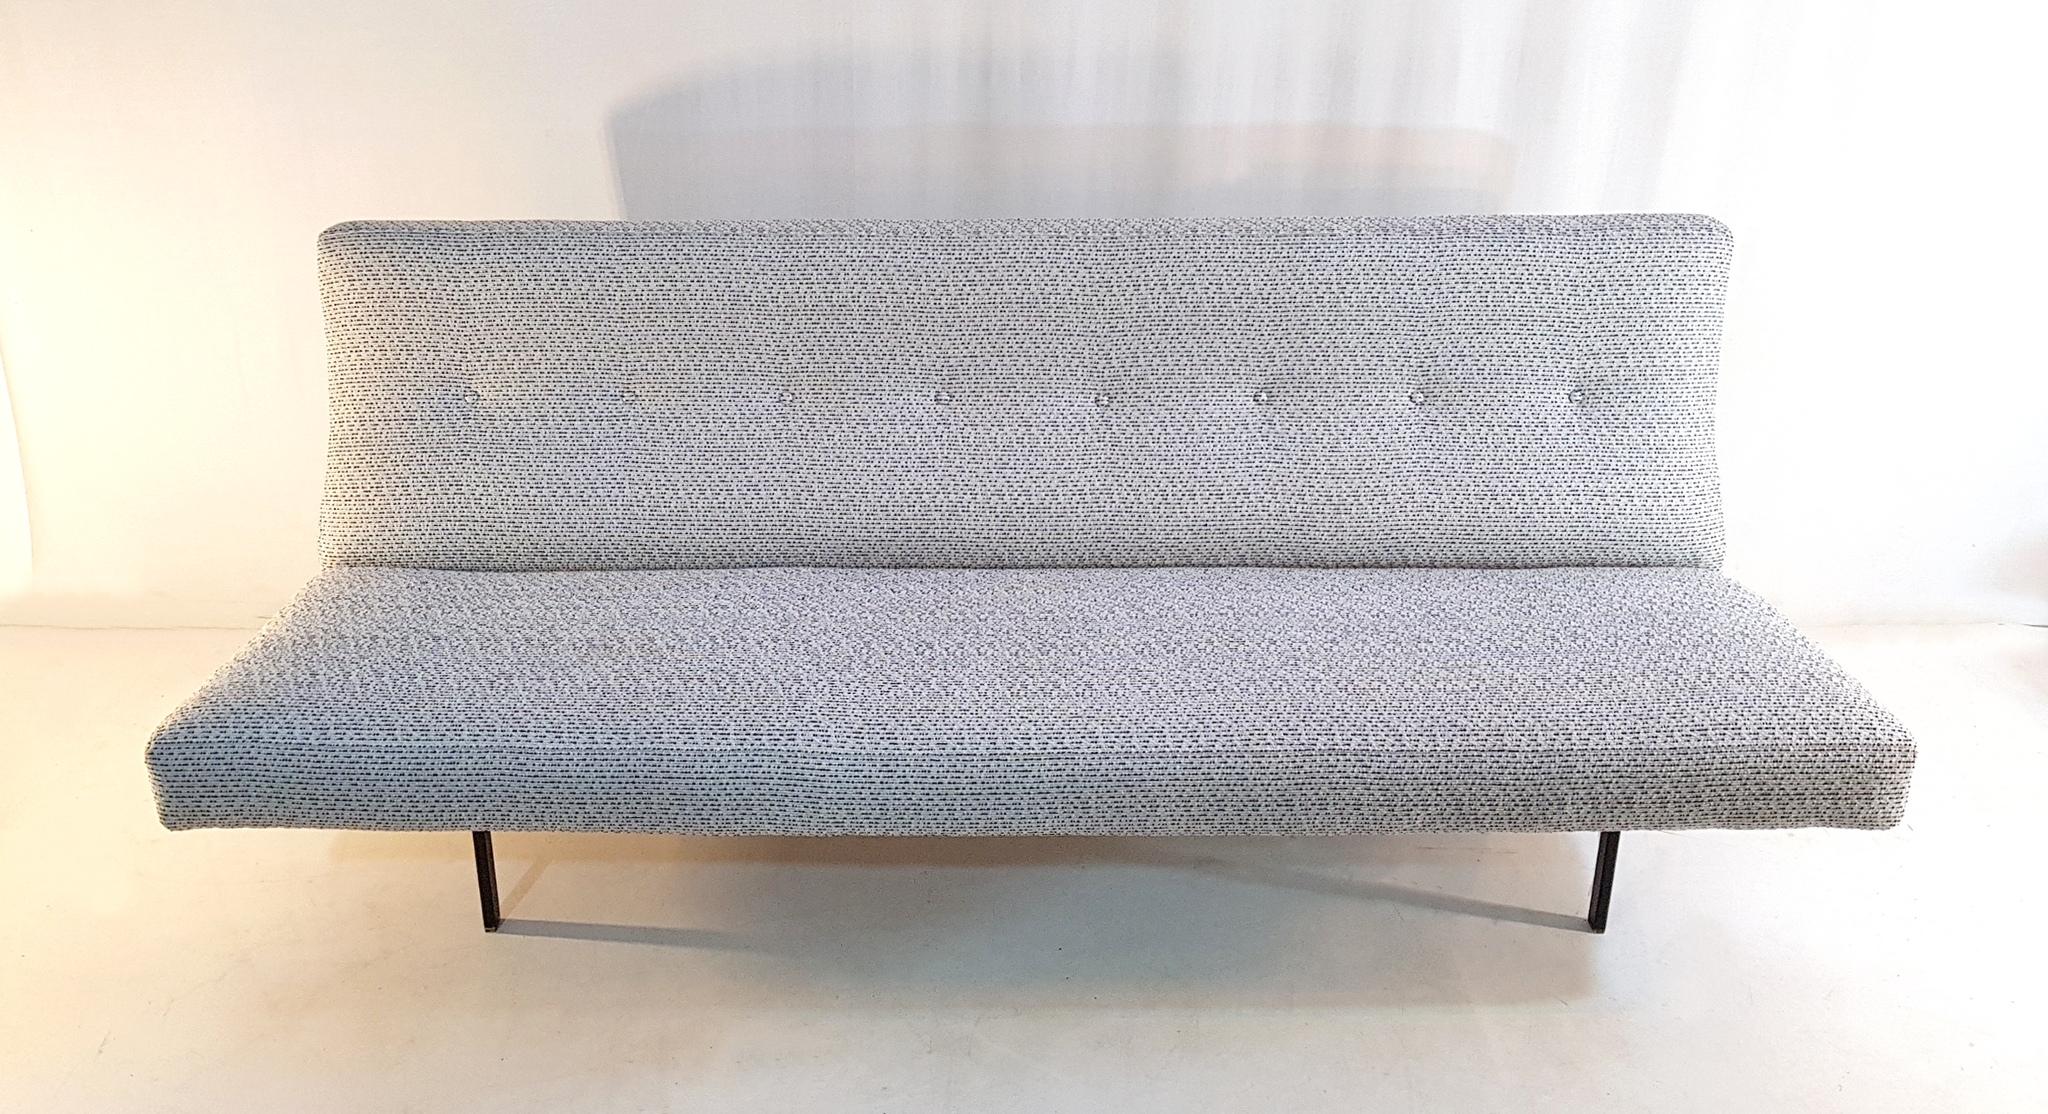 This Italian 1950s sofa has been professionally reupholstered in a strong quality fabric in salt-n-pepper style so called 